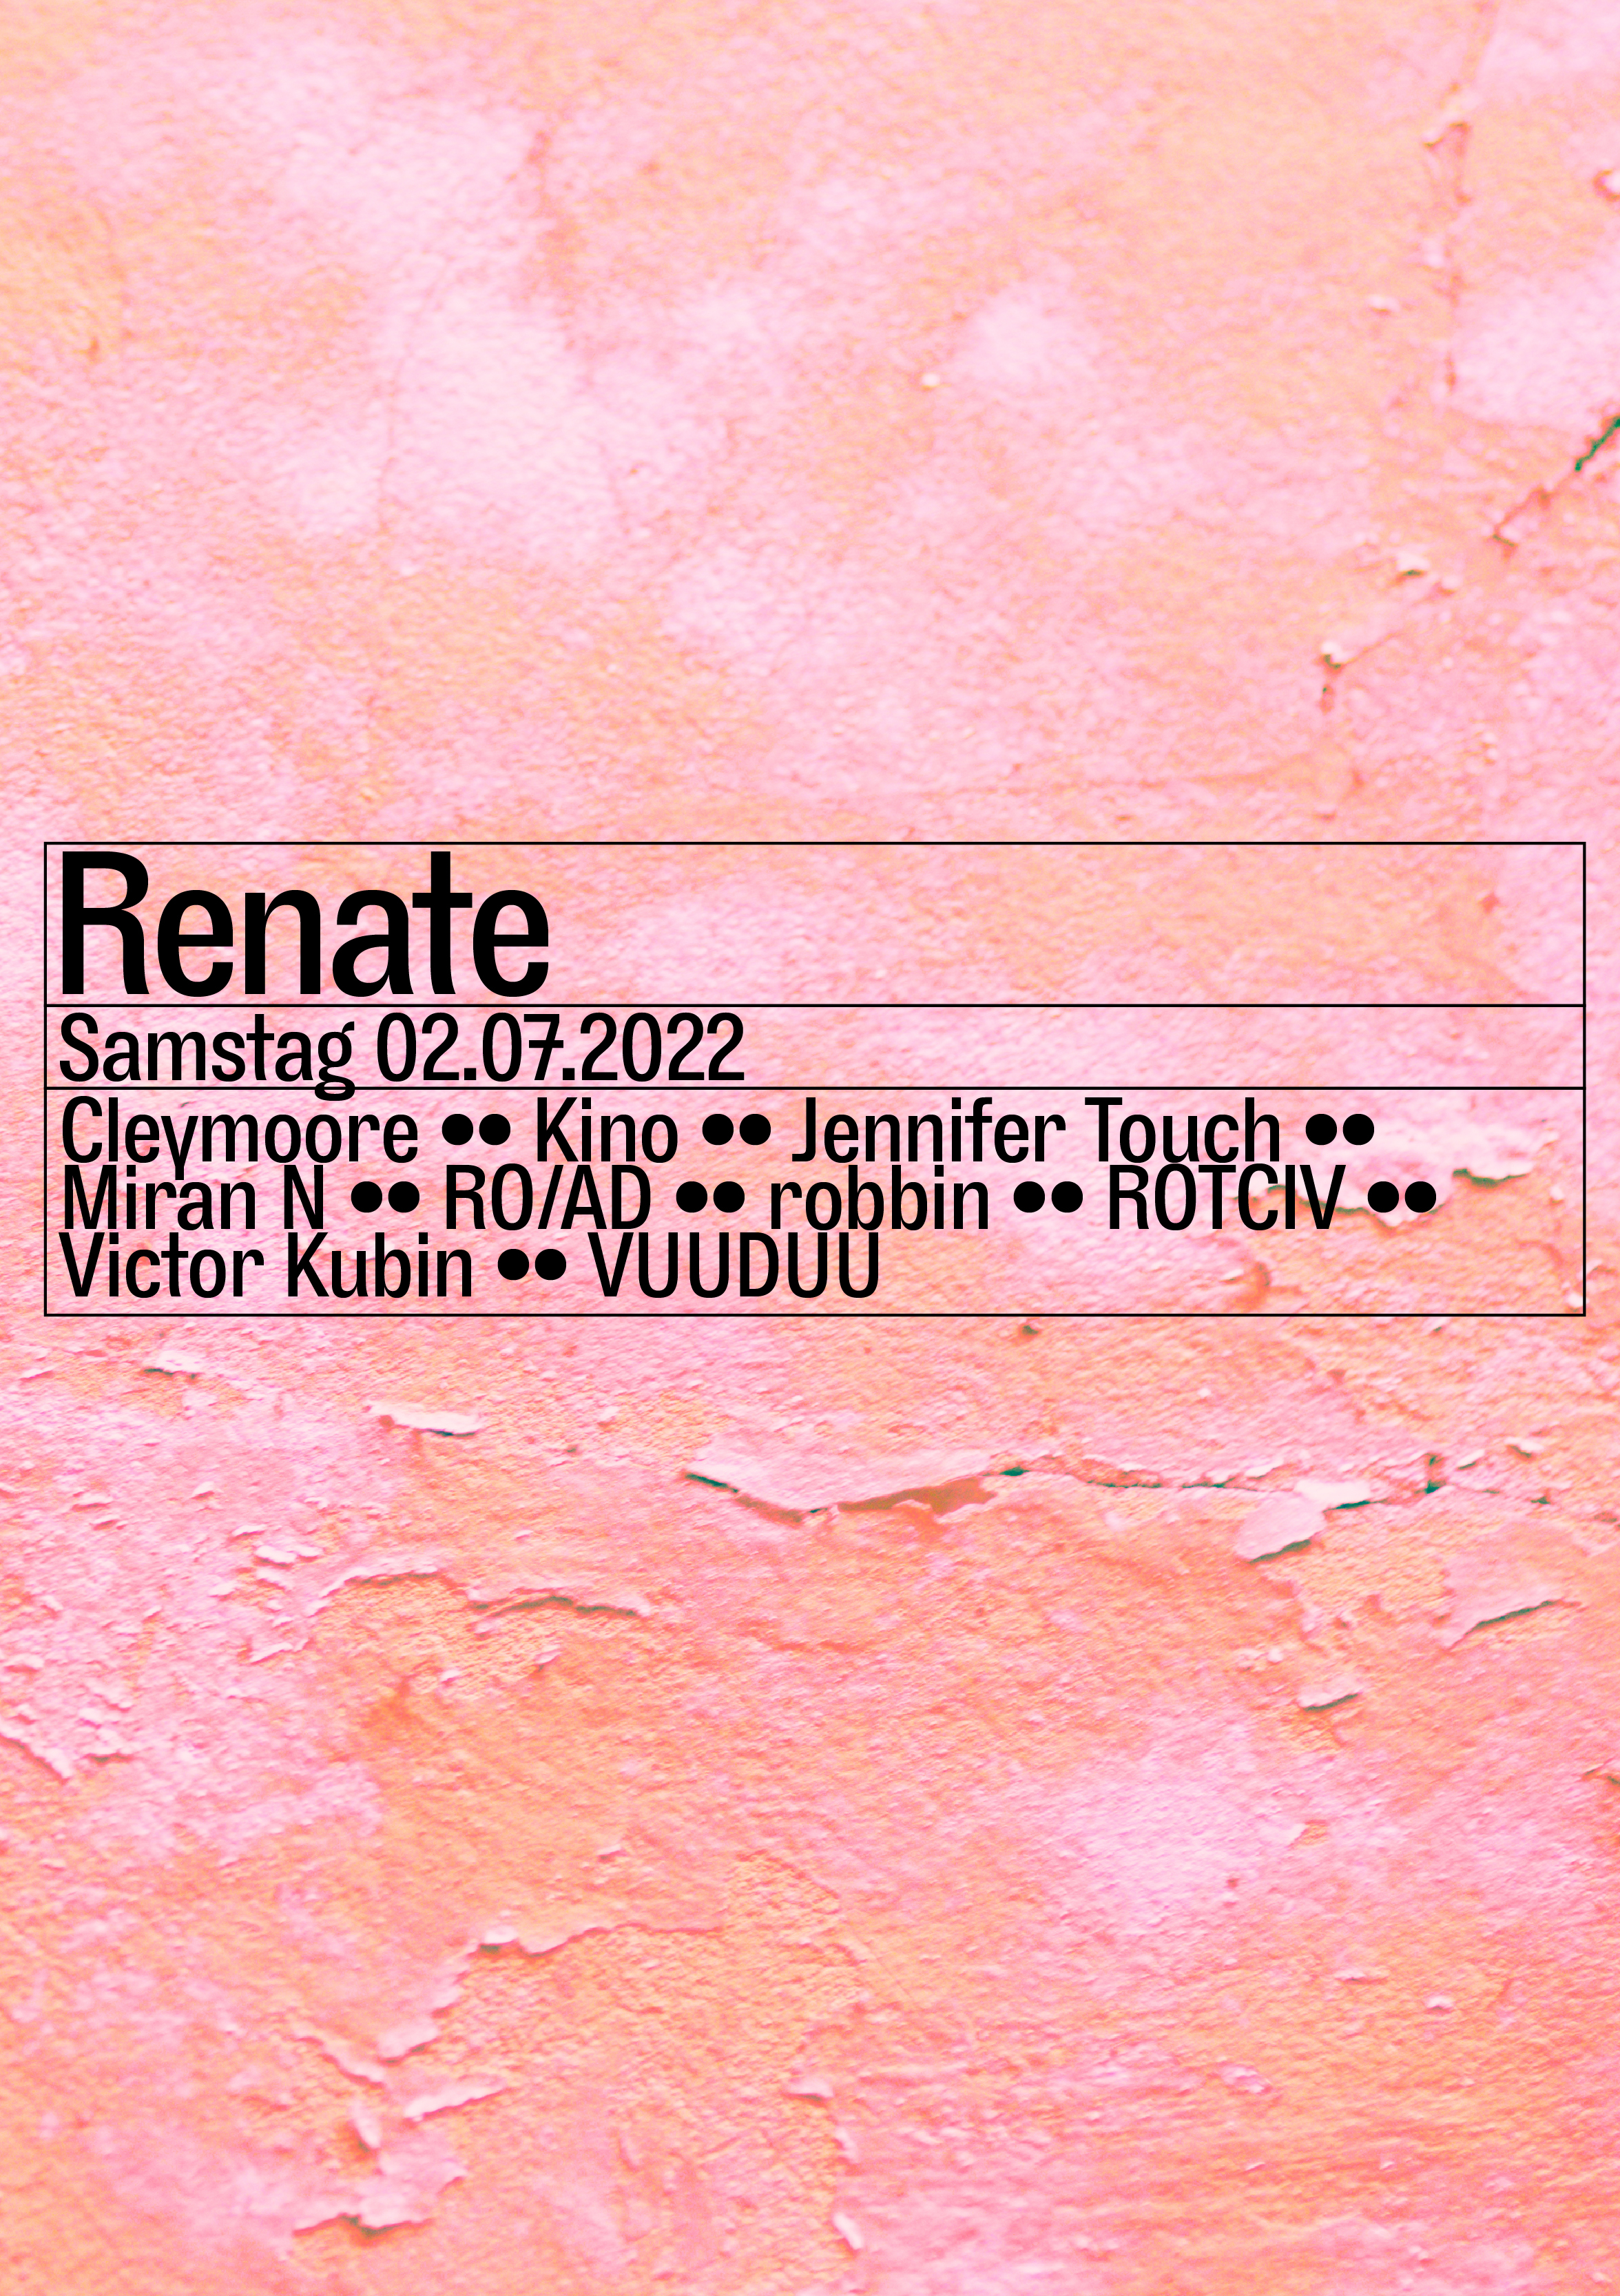 Samstag with Cleymoore, Jennifer Touch, Rotciv, VUUDUU - Flyer front